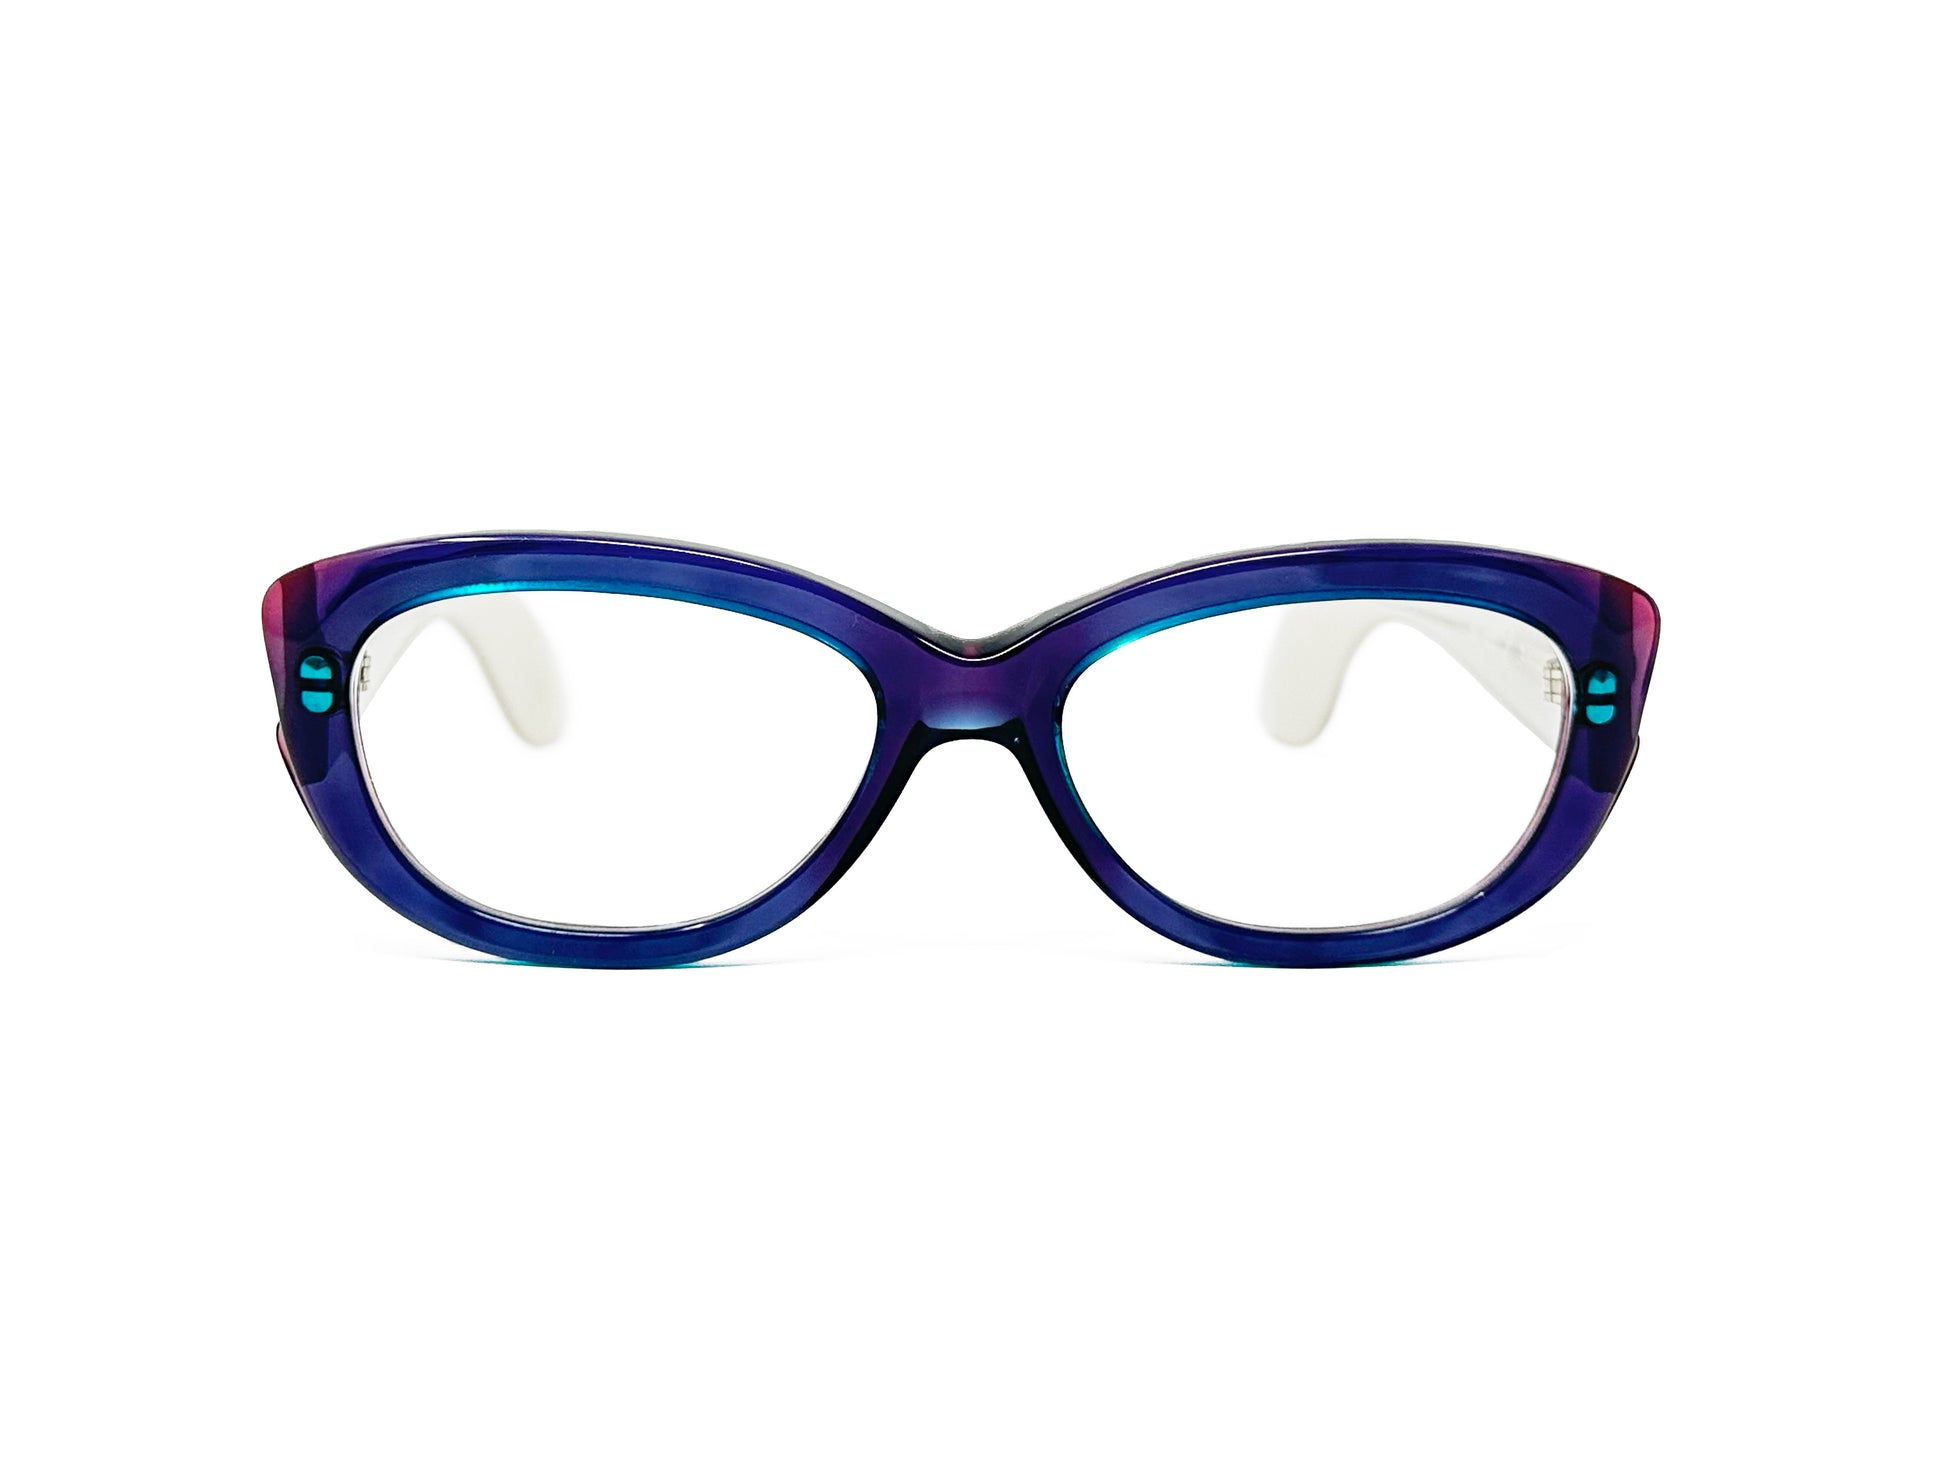 Kador rounded cate-eye acetate optical frame. Model: DF2002. Color: 2 - Semi-transparent purple with pink and teal accents. Front view. 